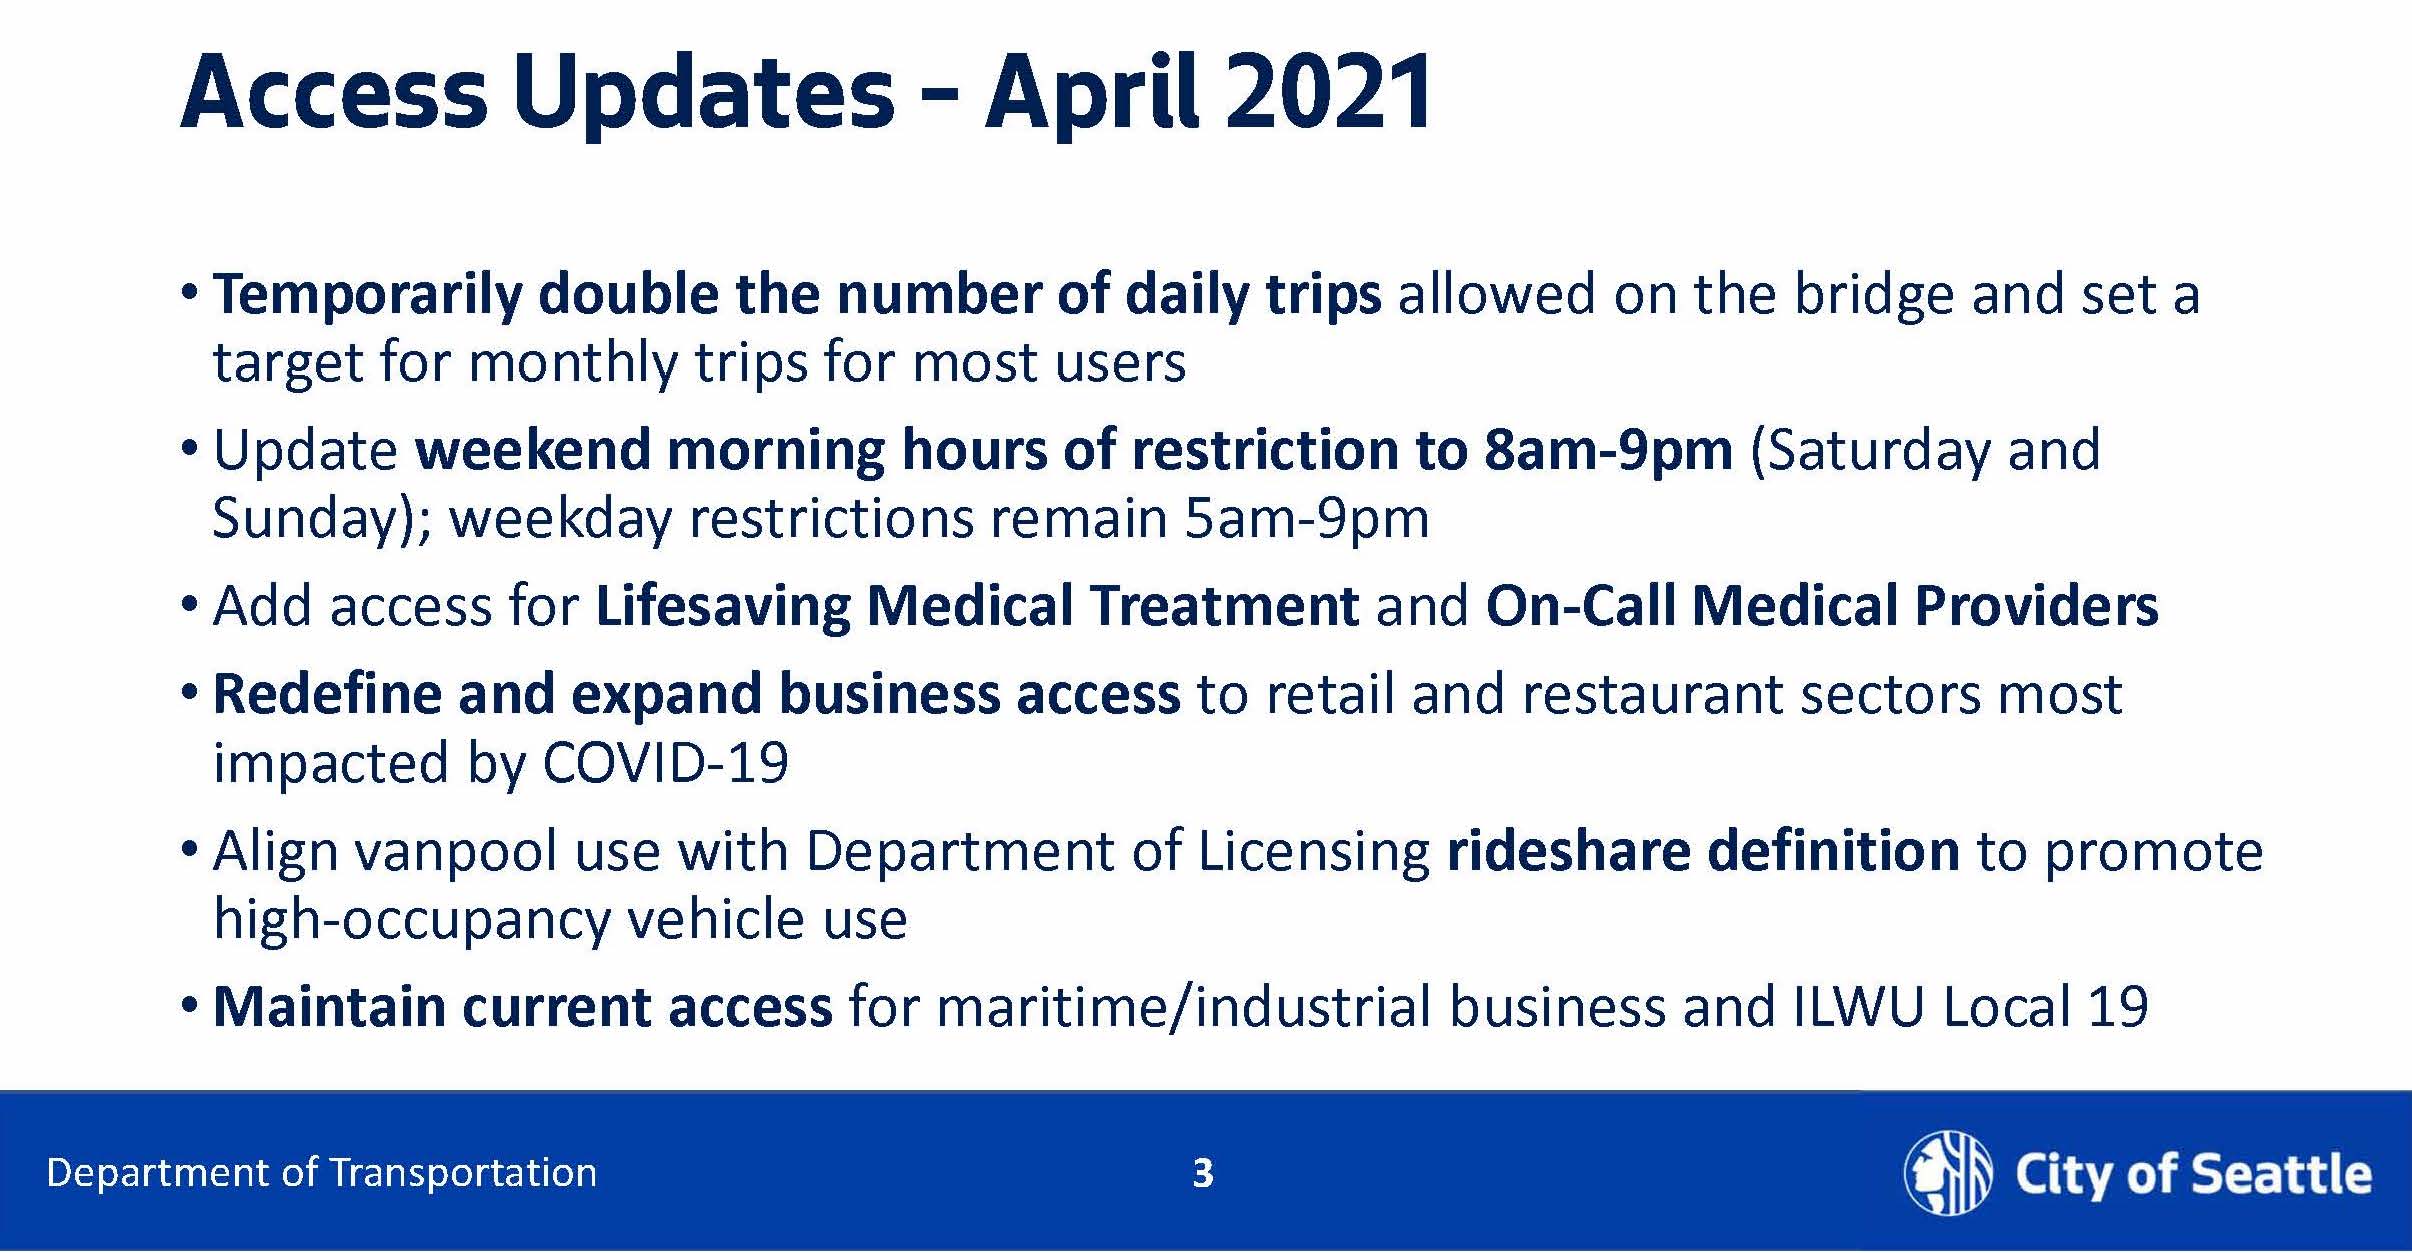 Access updates for April 2021